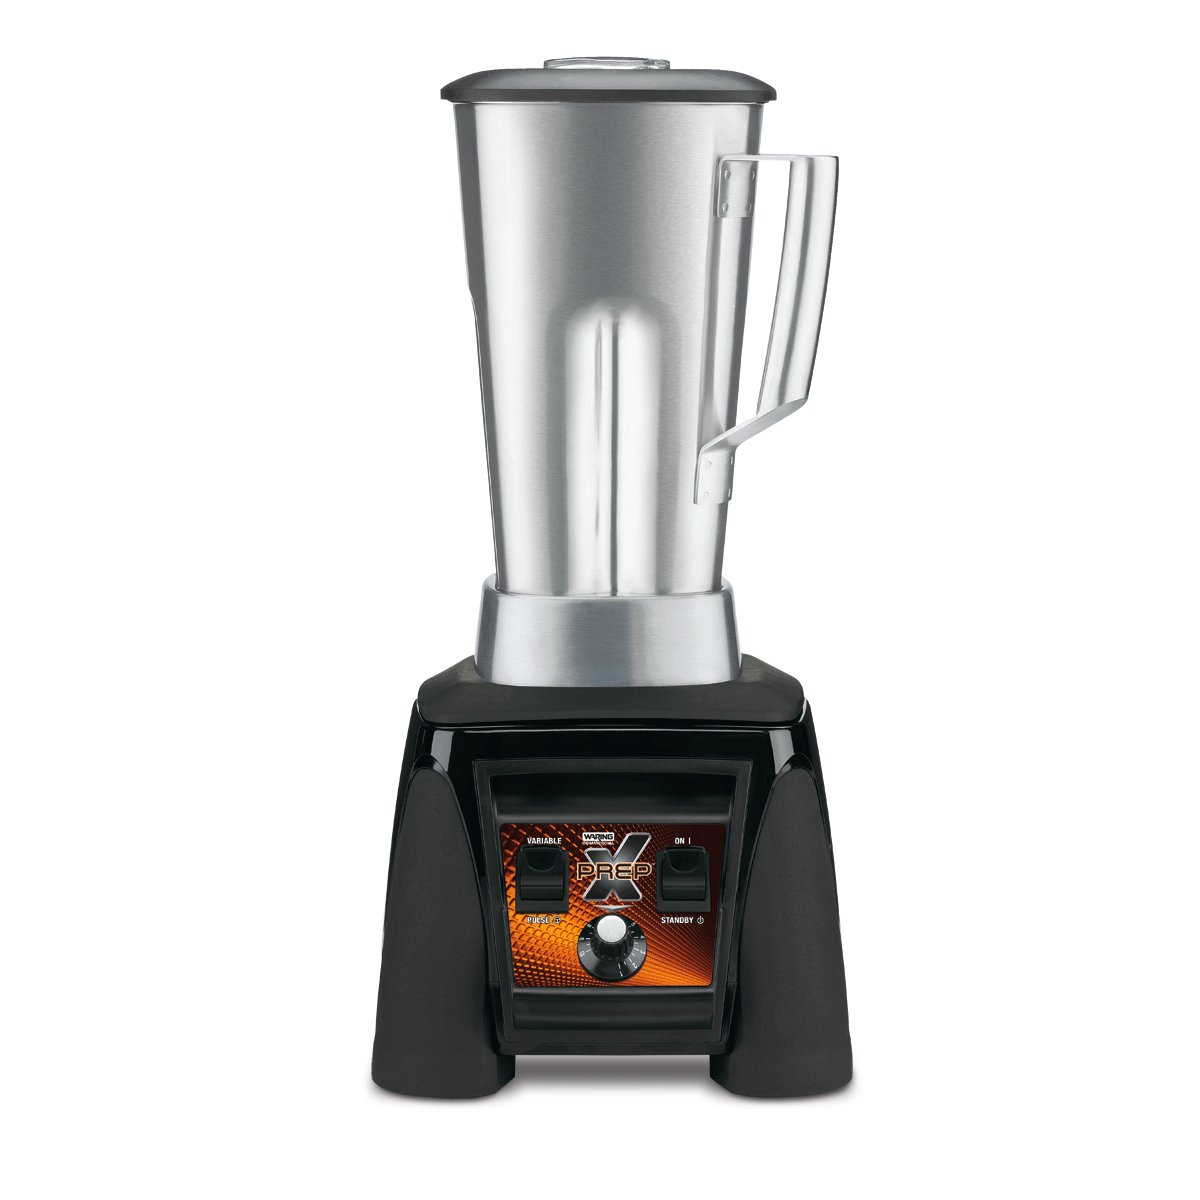 Conair™ Waring™ Laboratory Blenders: Two Speeds, Commercial